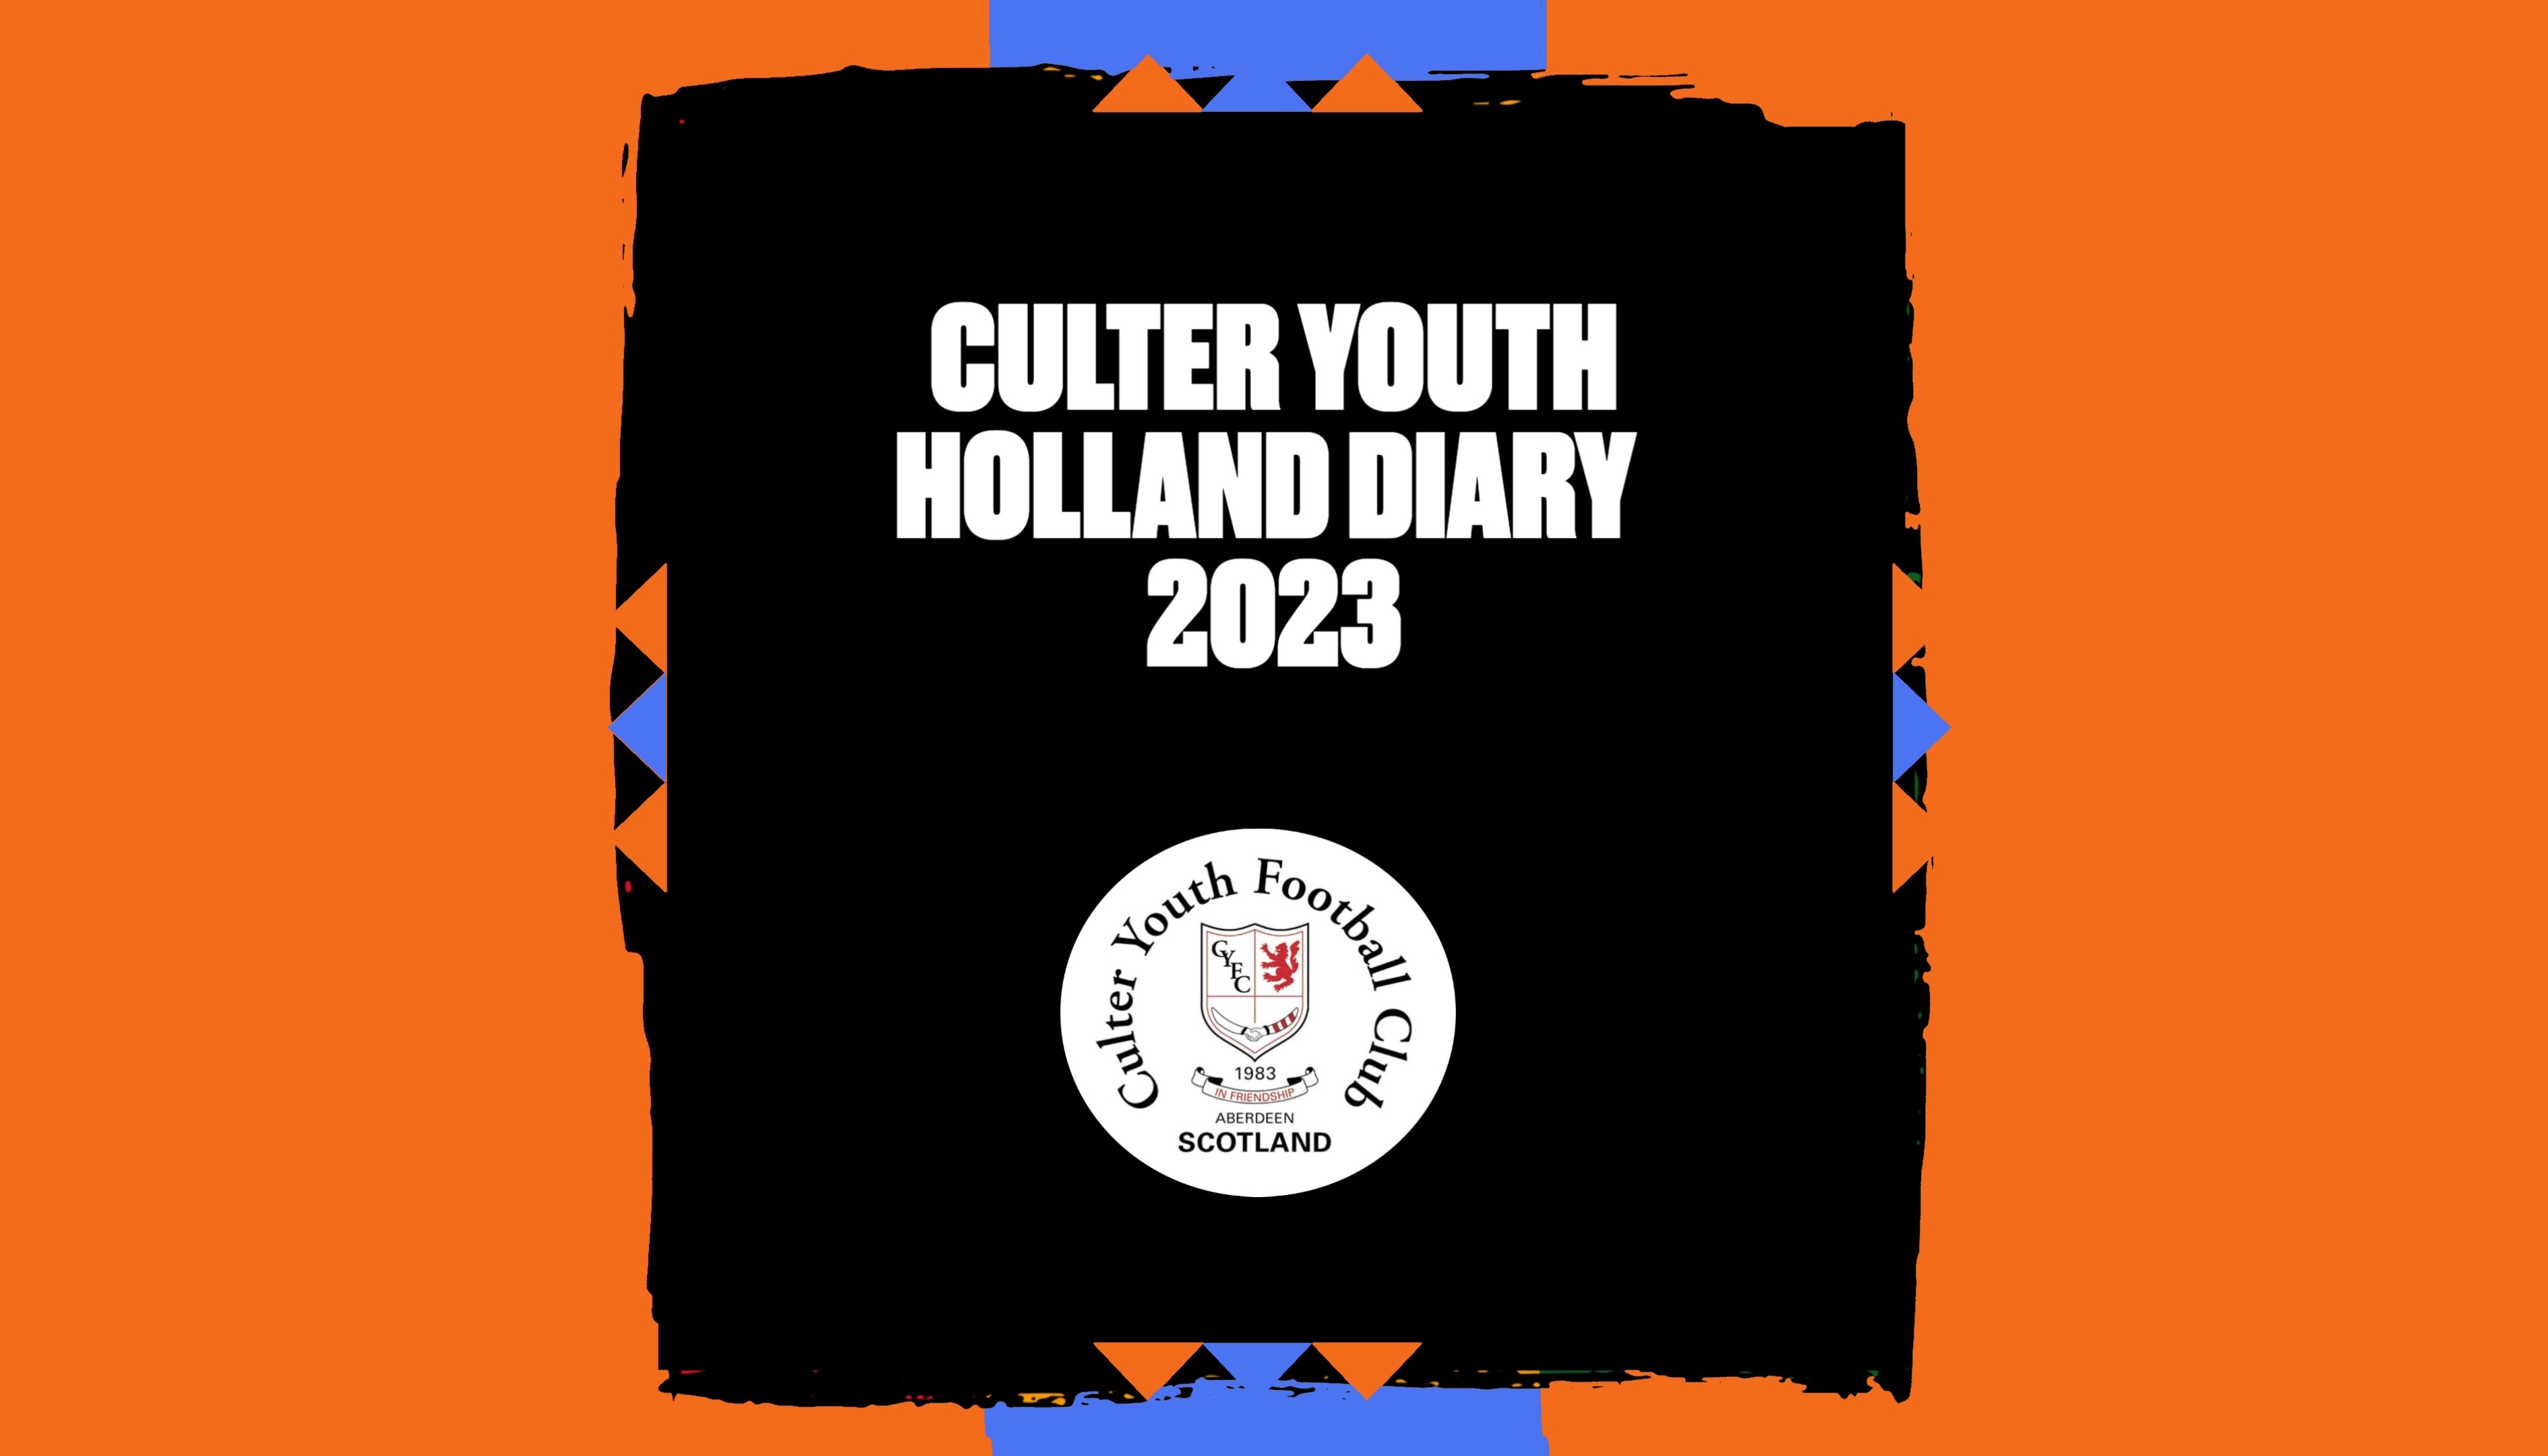 Read Culter Youth Holland Diary 2023 by Robbie Forsyth